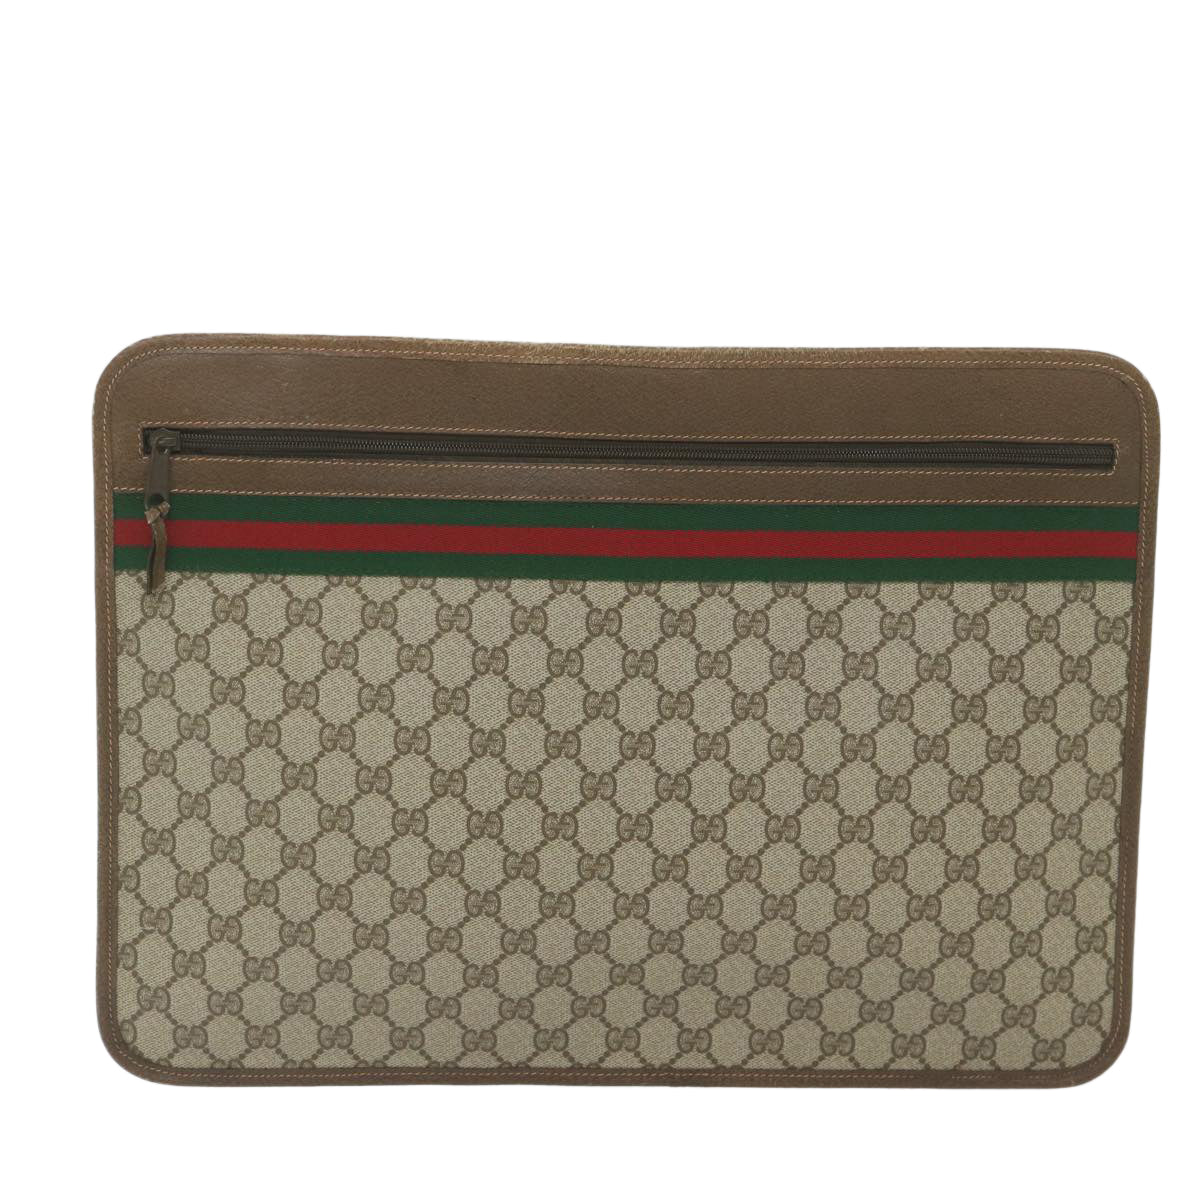 GUCCI GG Supreme Web Sherry Line Briefcase Beige Red Green 89 02 060 Auth tb936